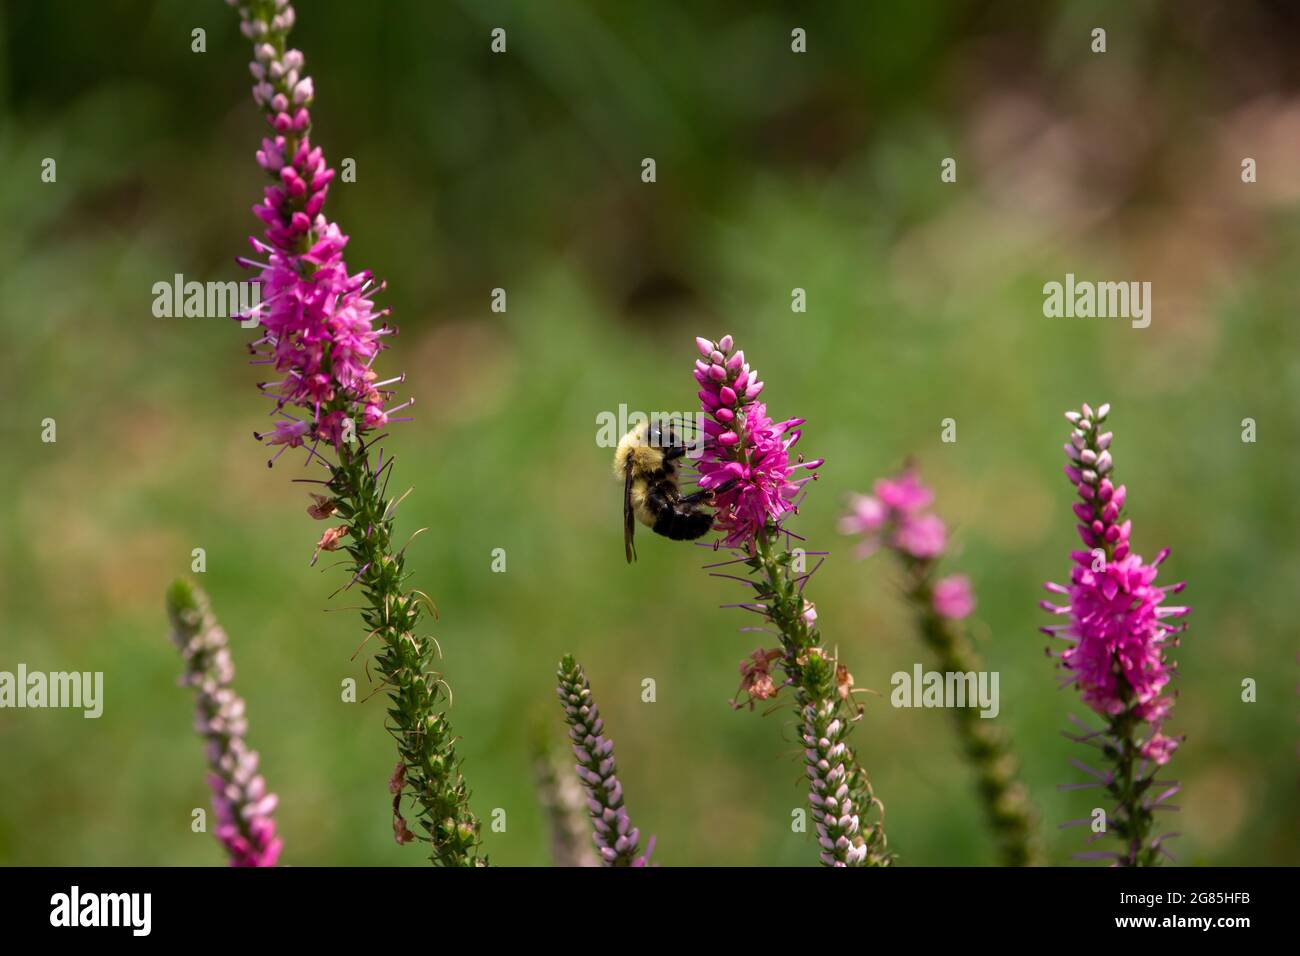 Macro view of a bumblebee feeding on the flower blossoms of an attractive spiked speedwell (veronica spicata) plant Stock Photo